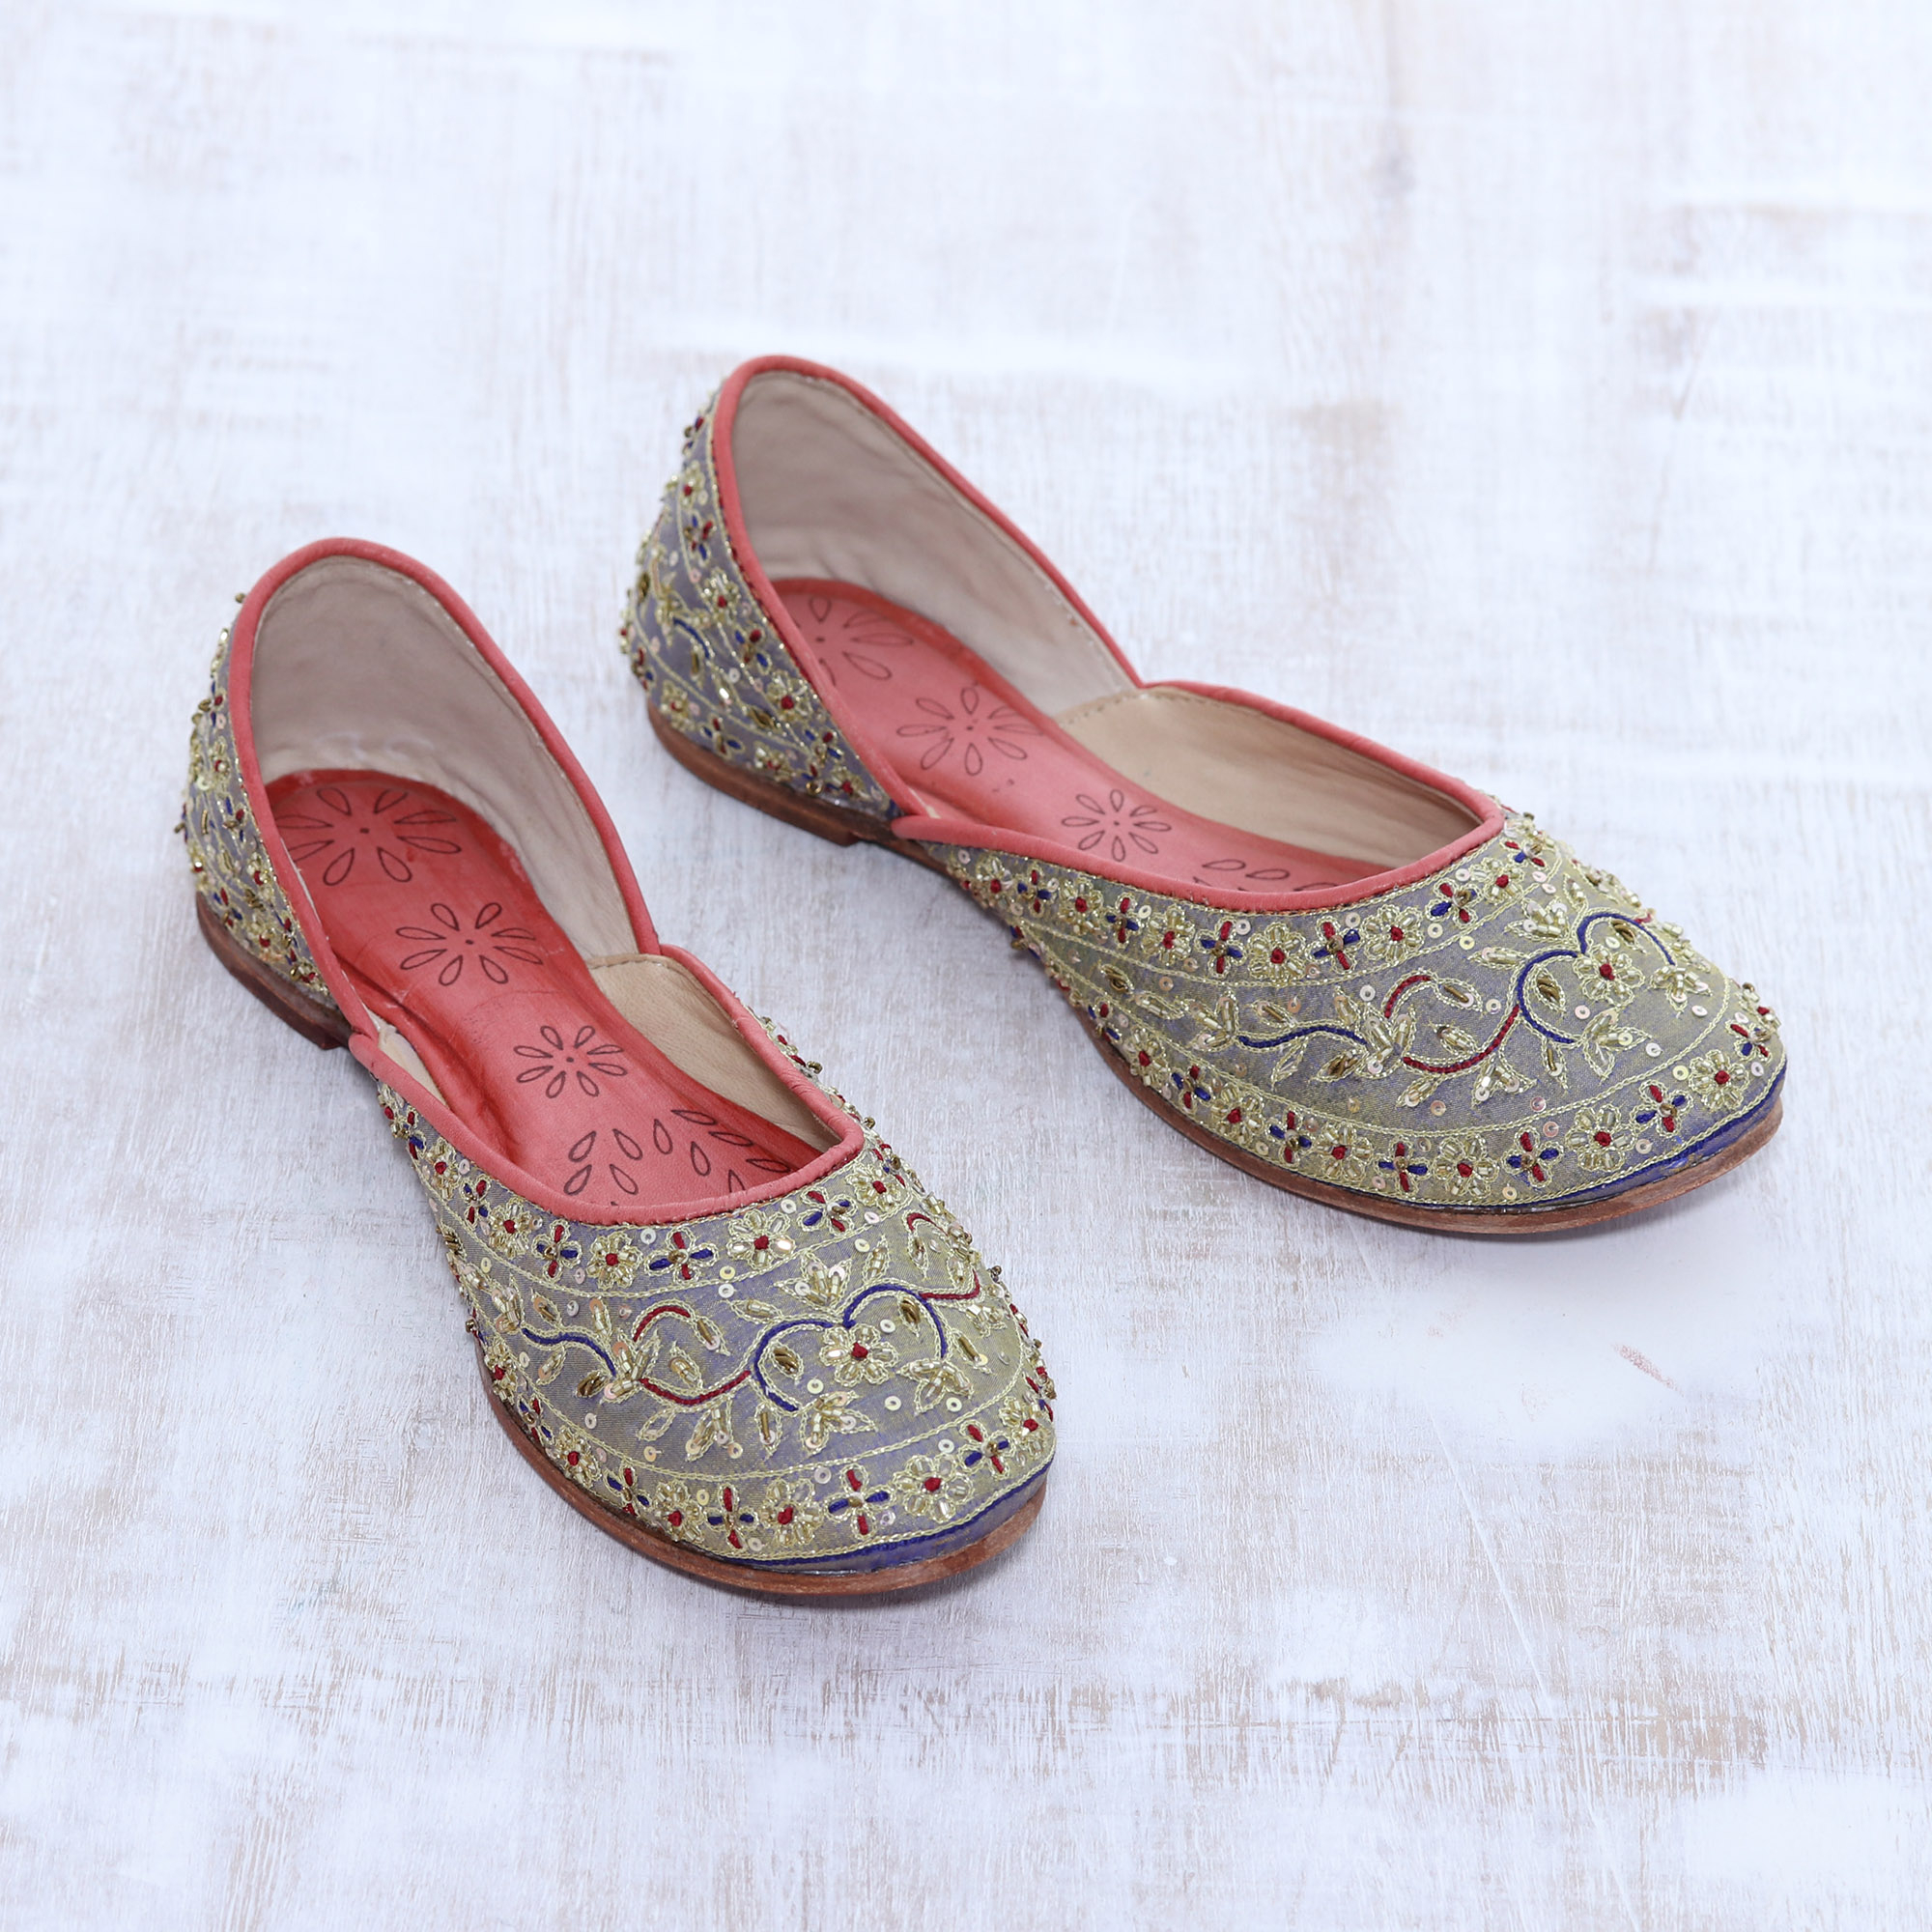 Floral Hand-Embellished Silk Jutti Shoes from India - Taj Mahal Flowers |  NOVICA